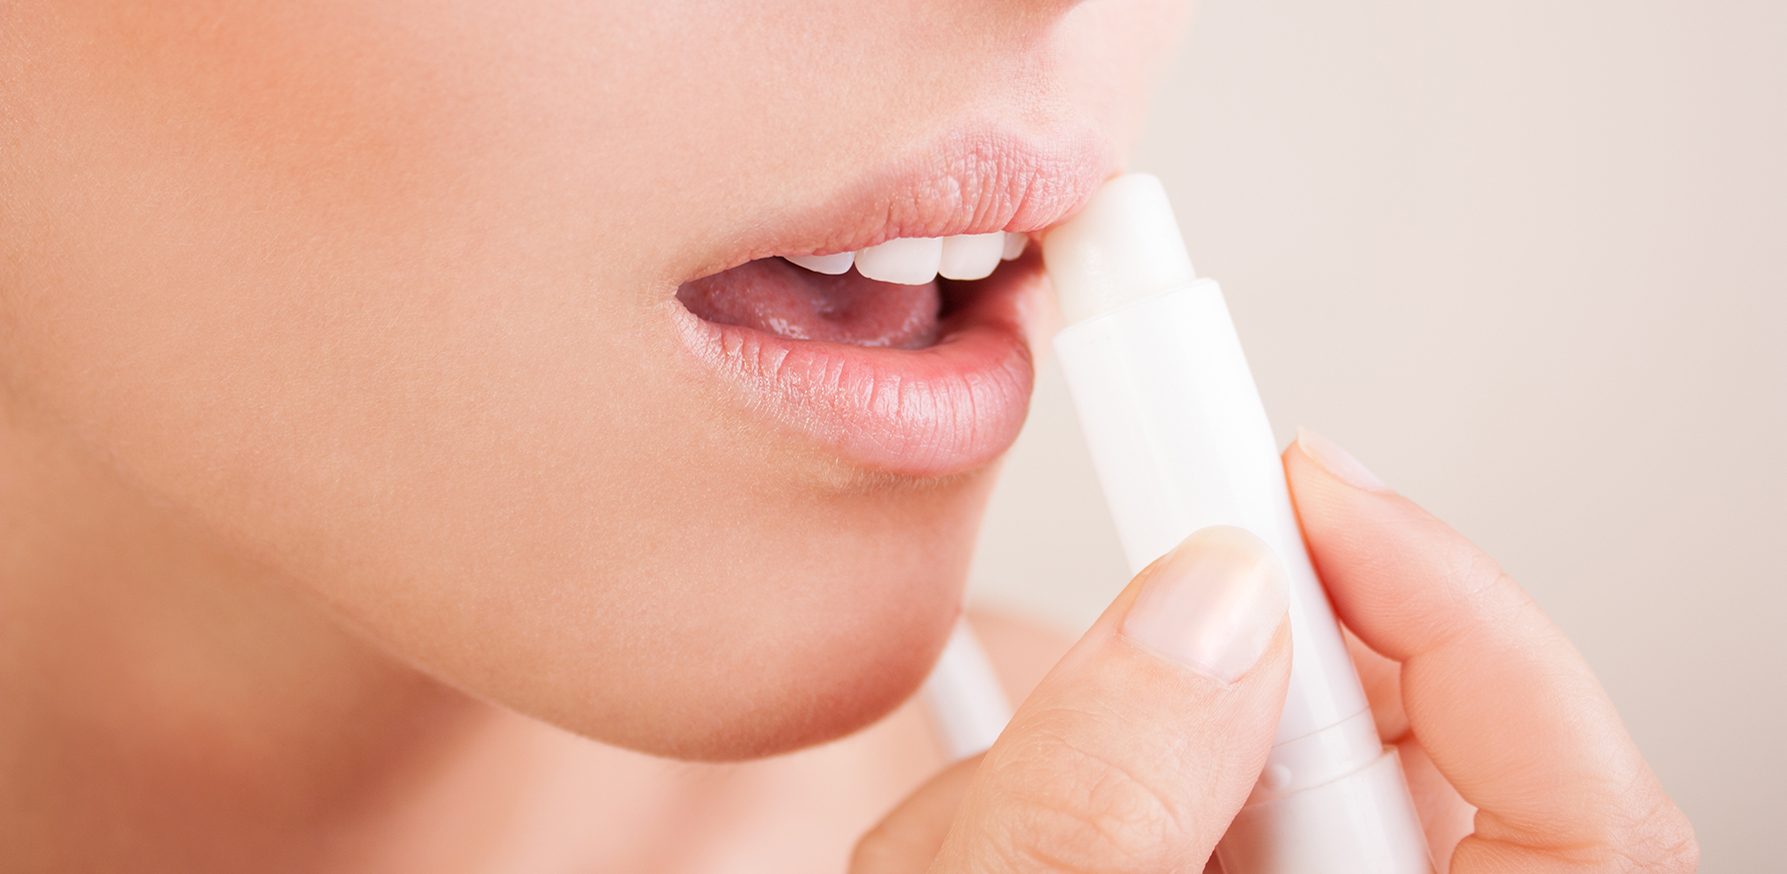 lip-health-101-how-to-take-care-of-your-lips